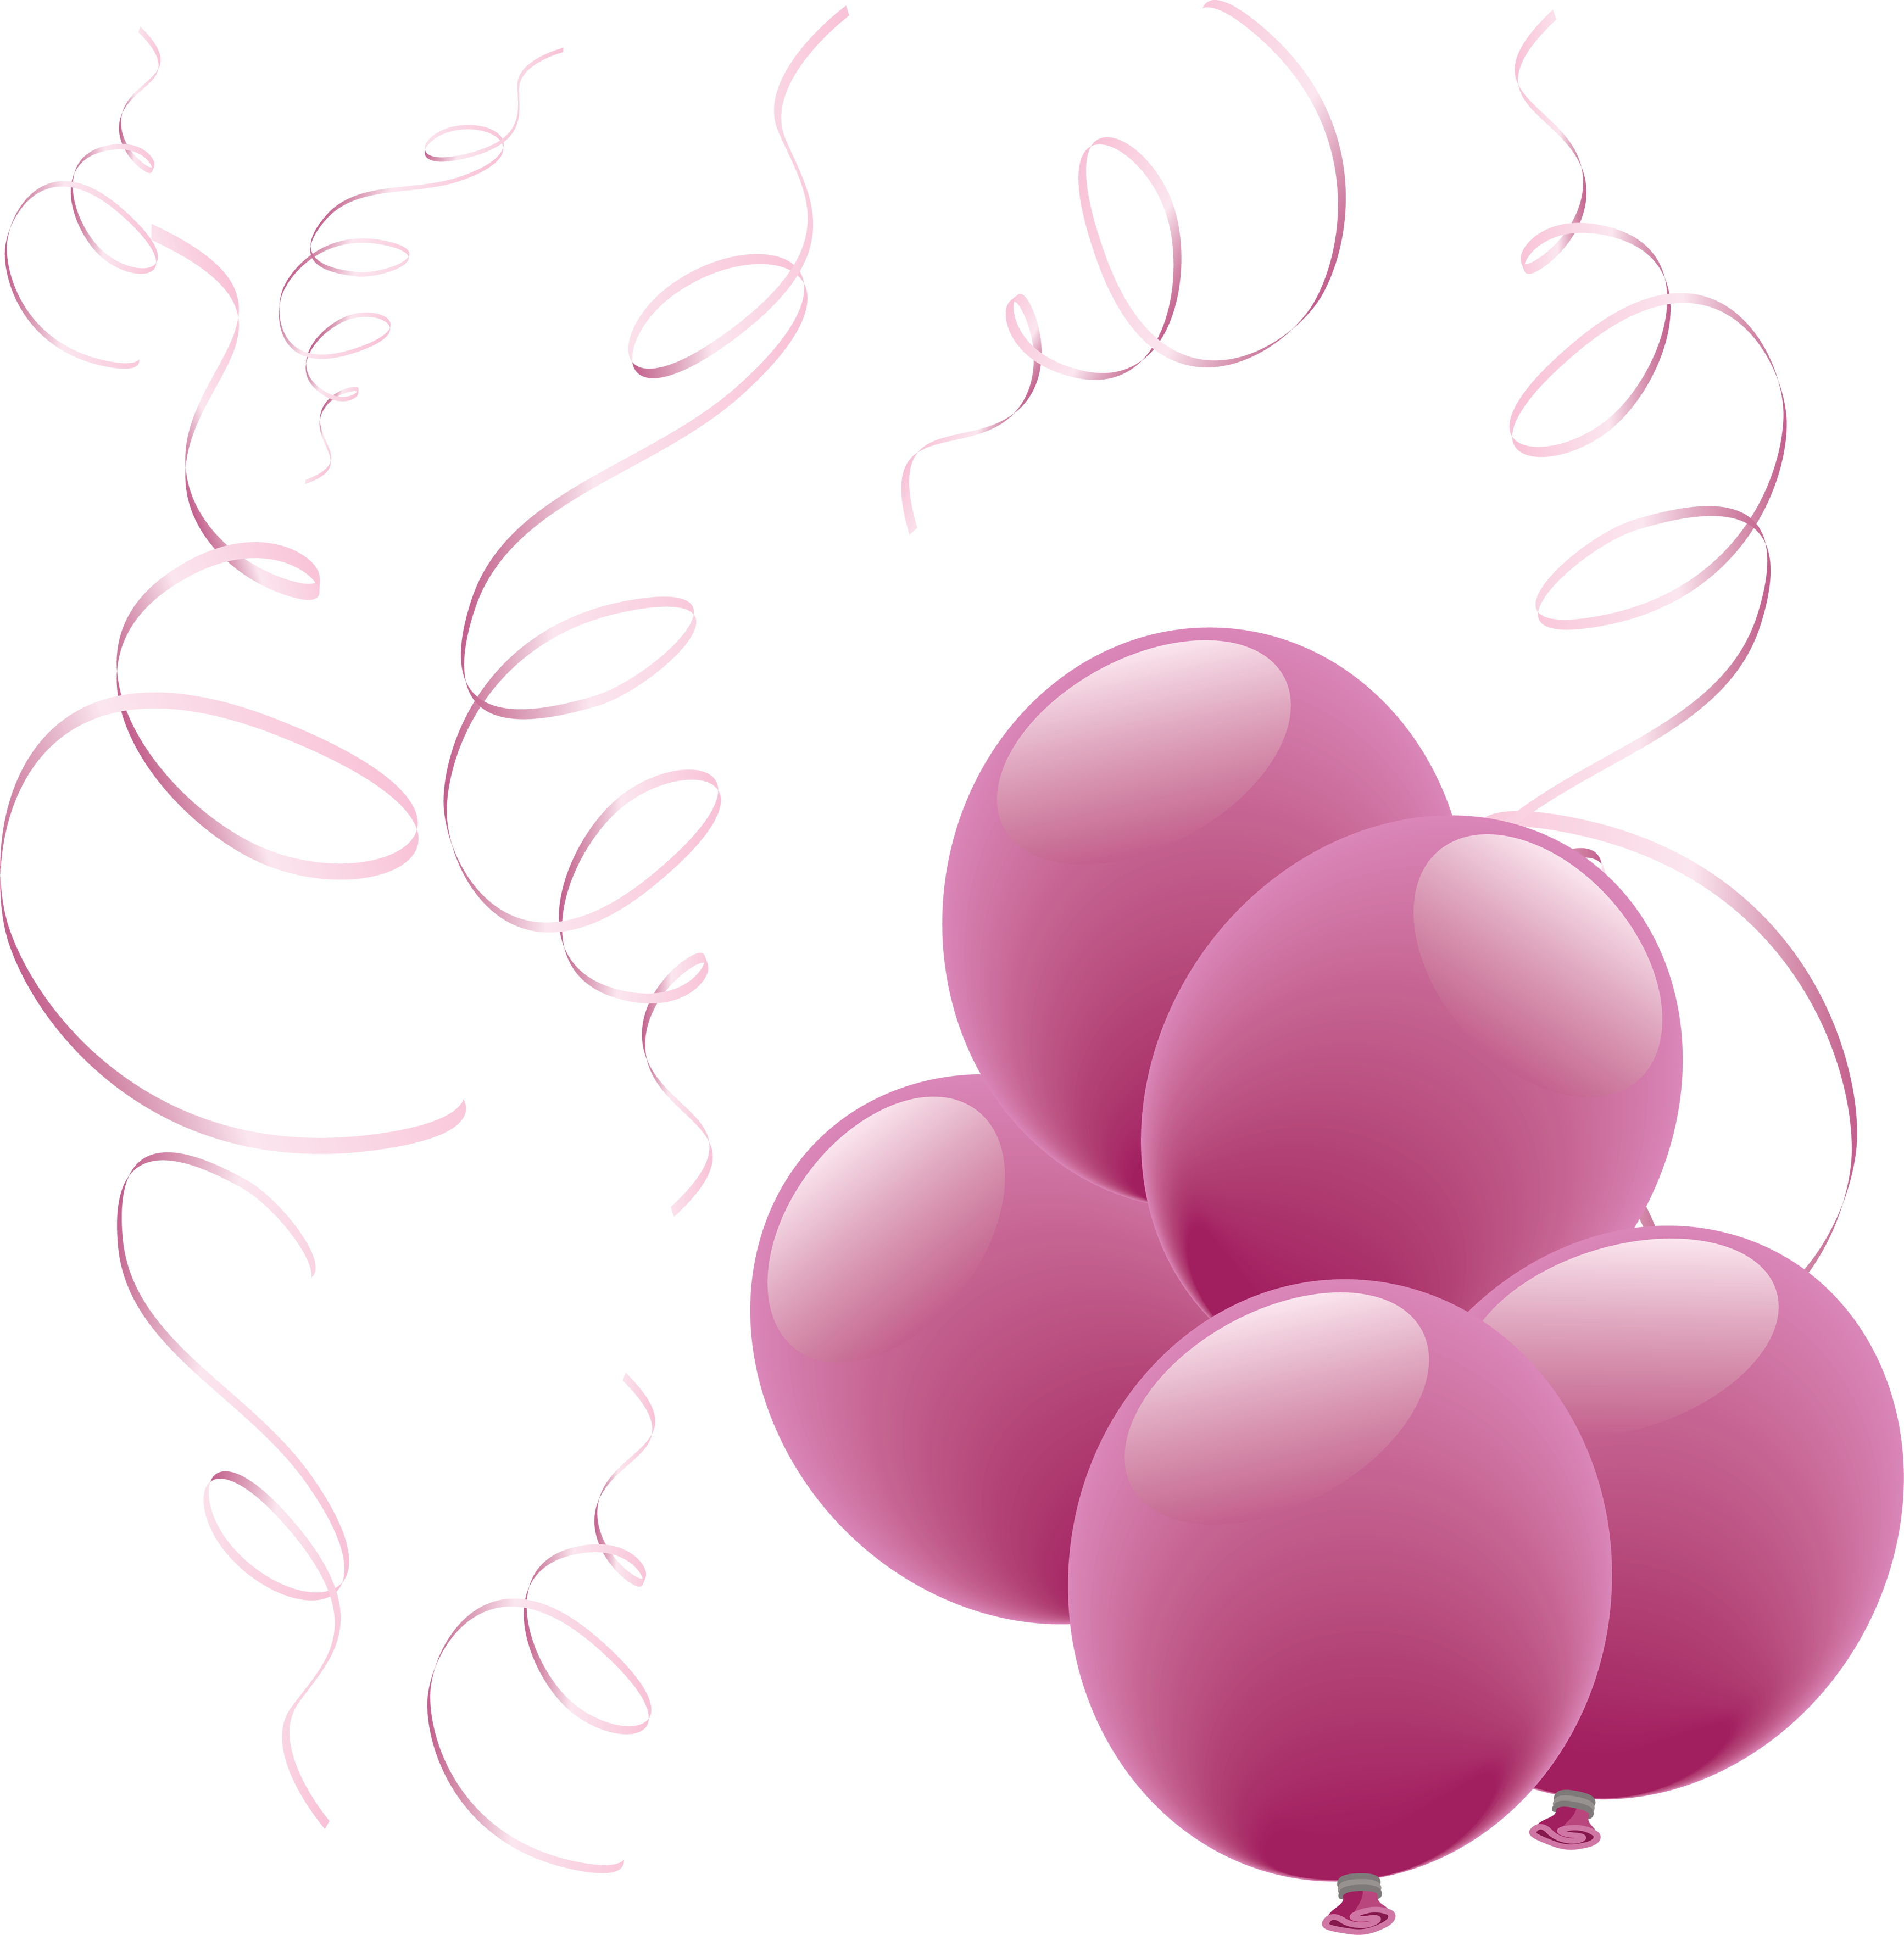 Grapes clipart ten. Balloon png web icons